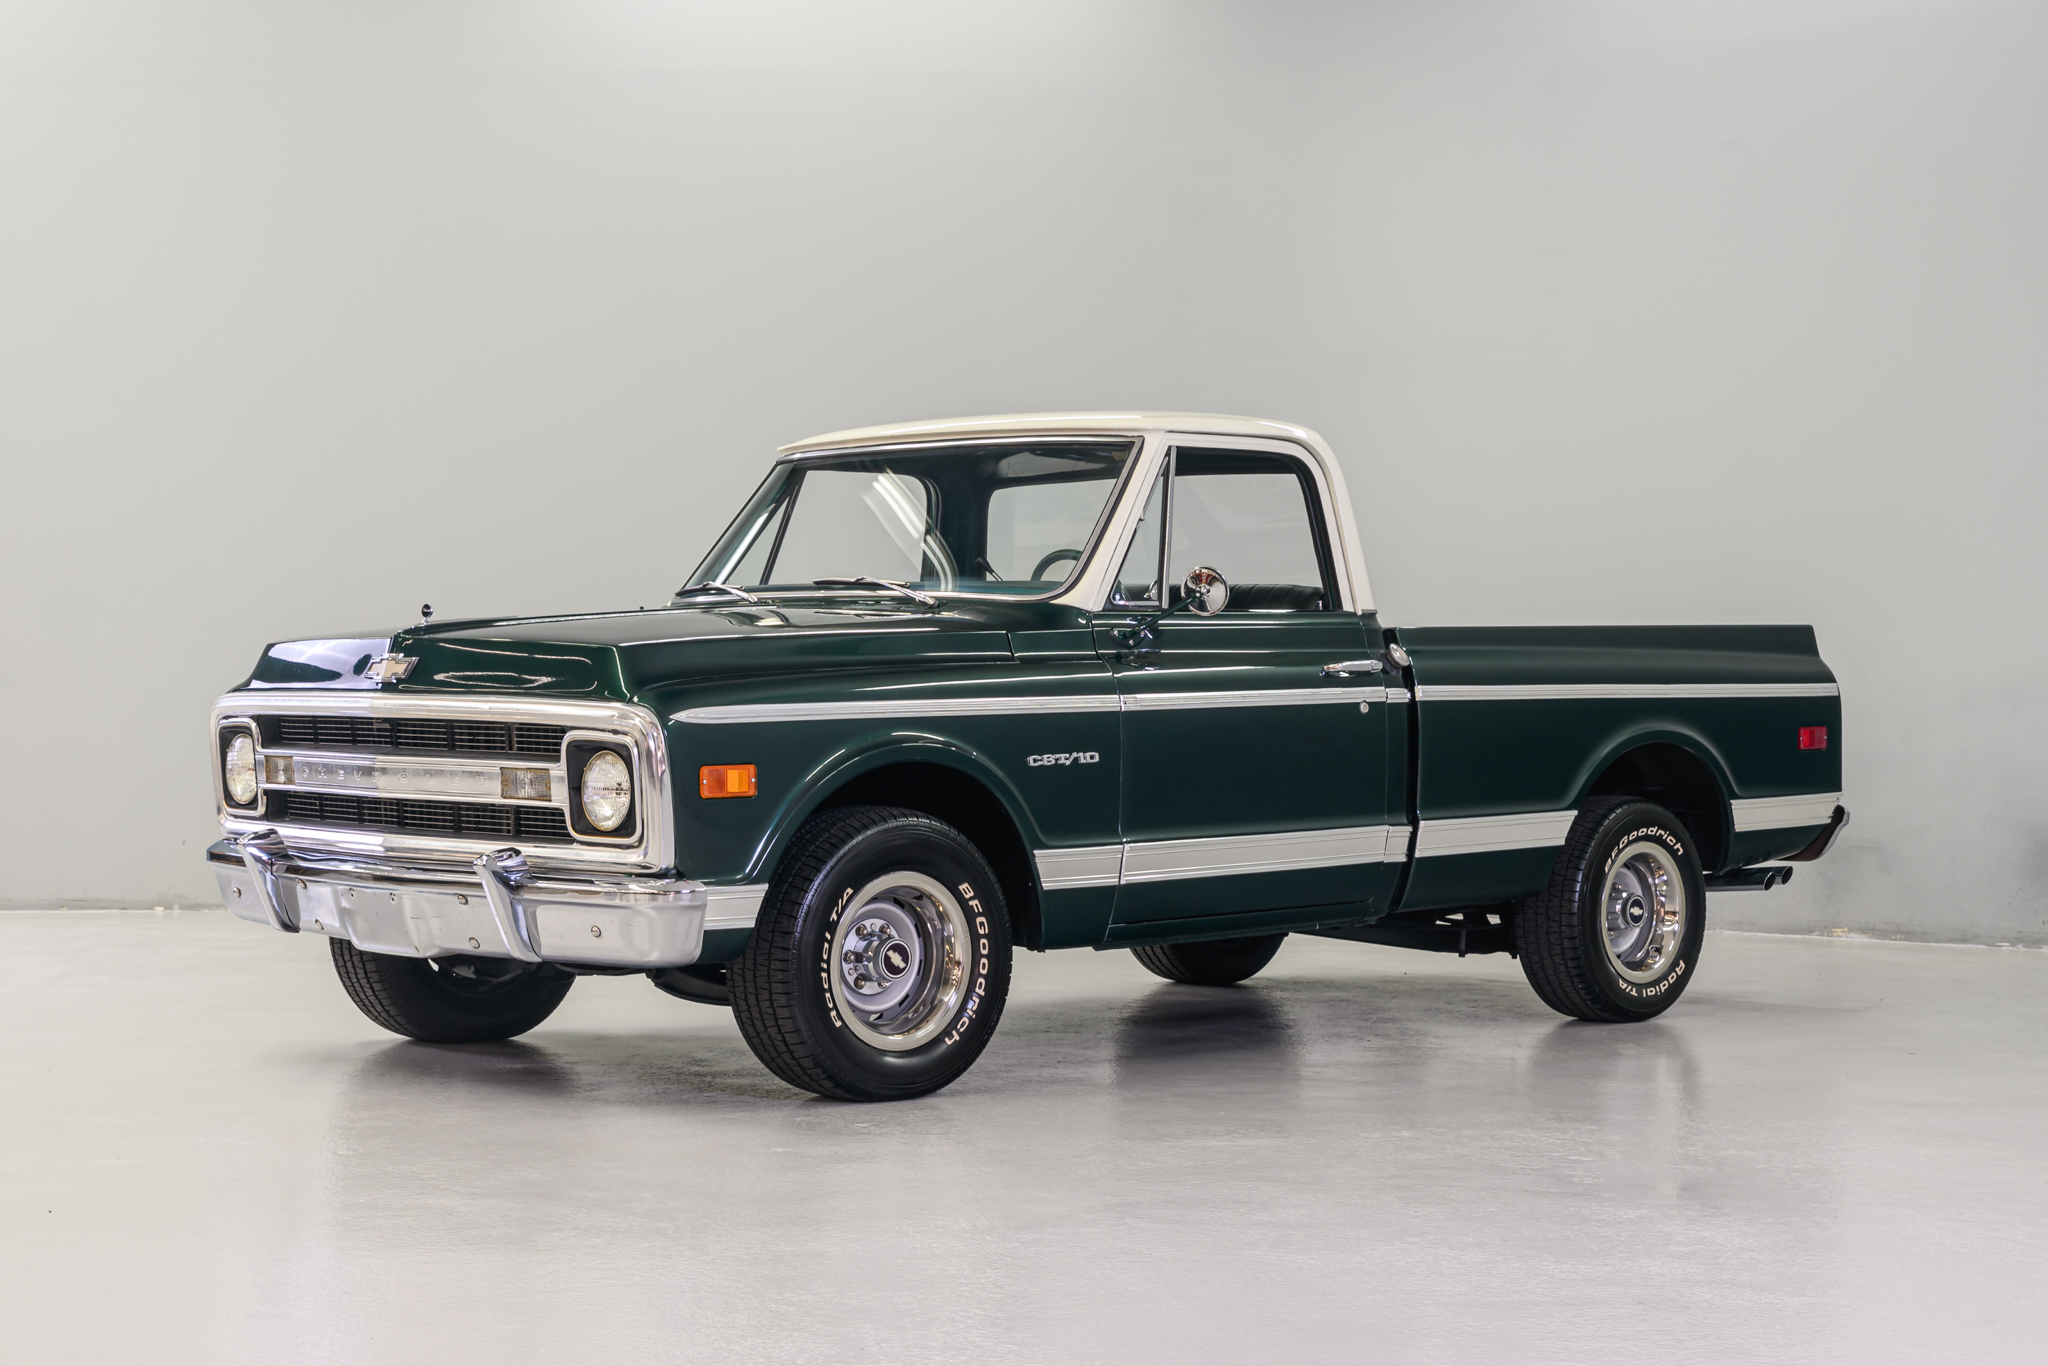 1967 Chevrolet C20 (Truck) 3/4 Ton | Hagerty Valuation Tools